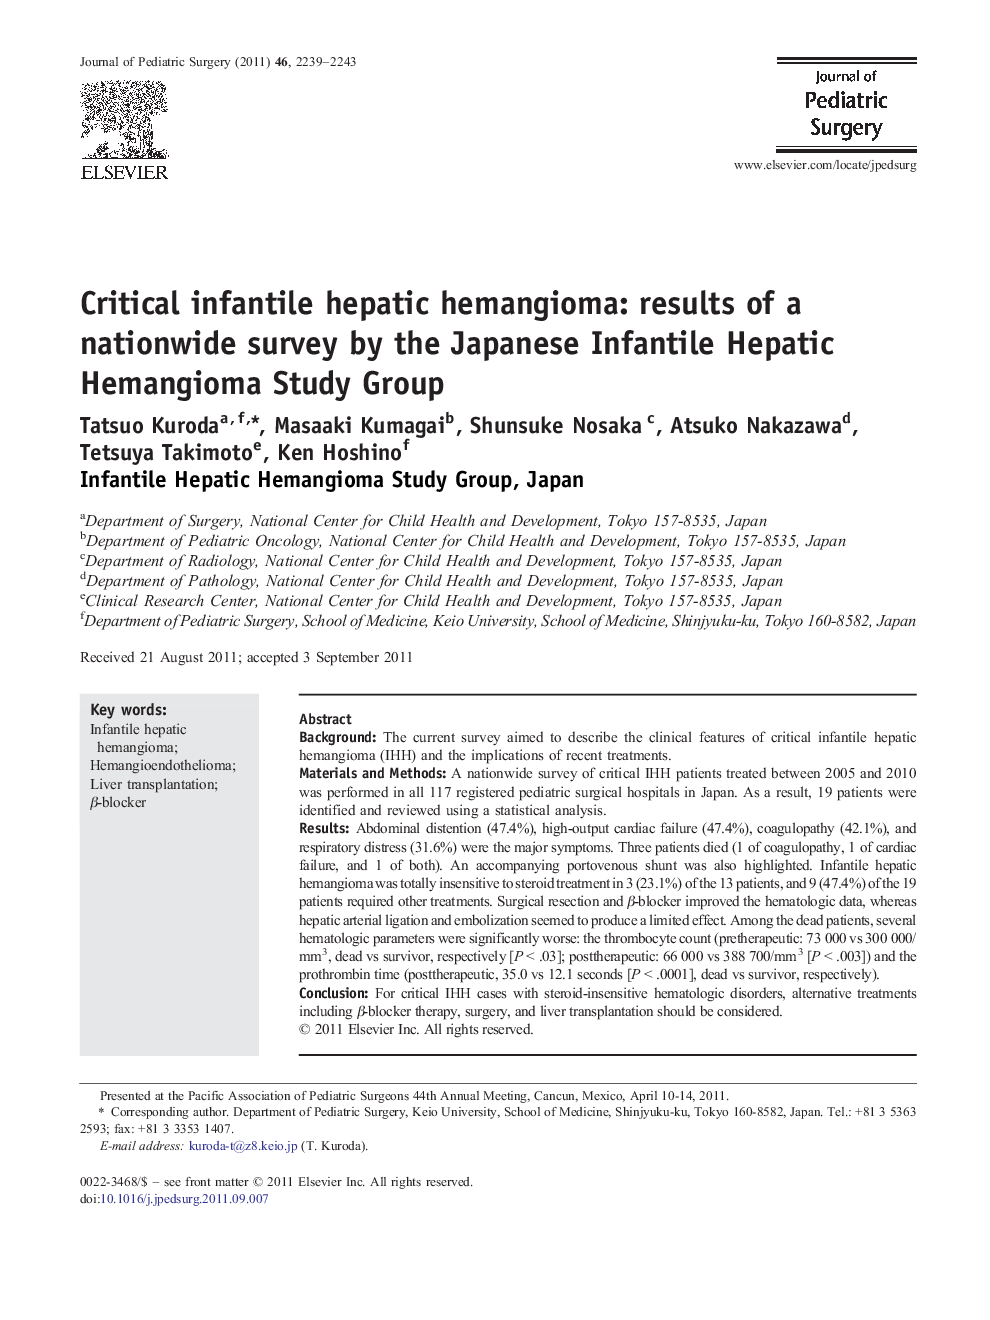 Critical infantile hepatic hemangioma: results of a nationwide survey by the Japanese Infantile Hepatic Hemangioma Study Group 